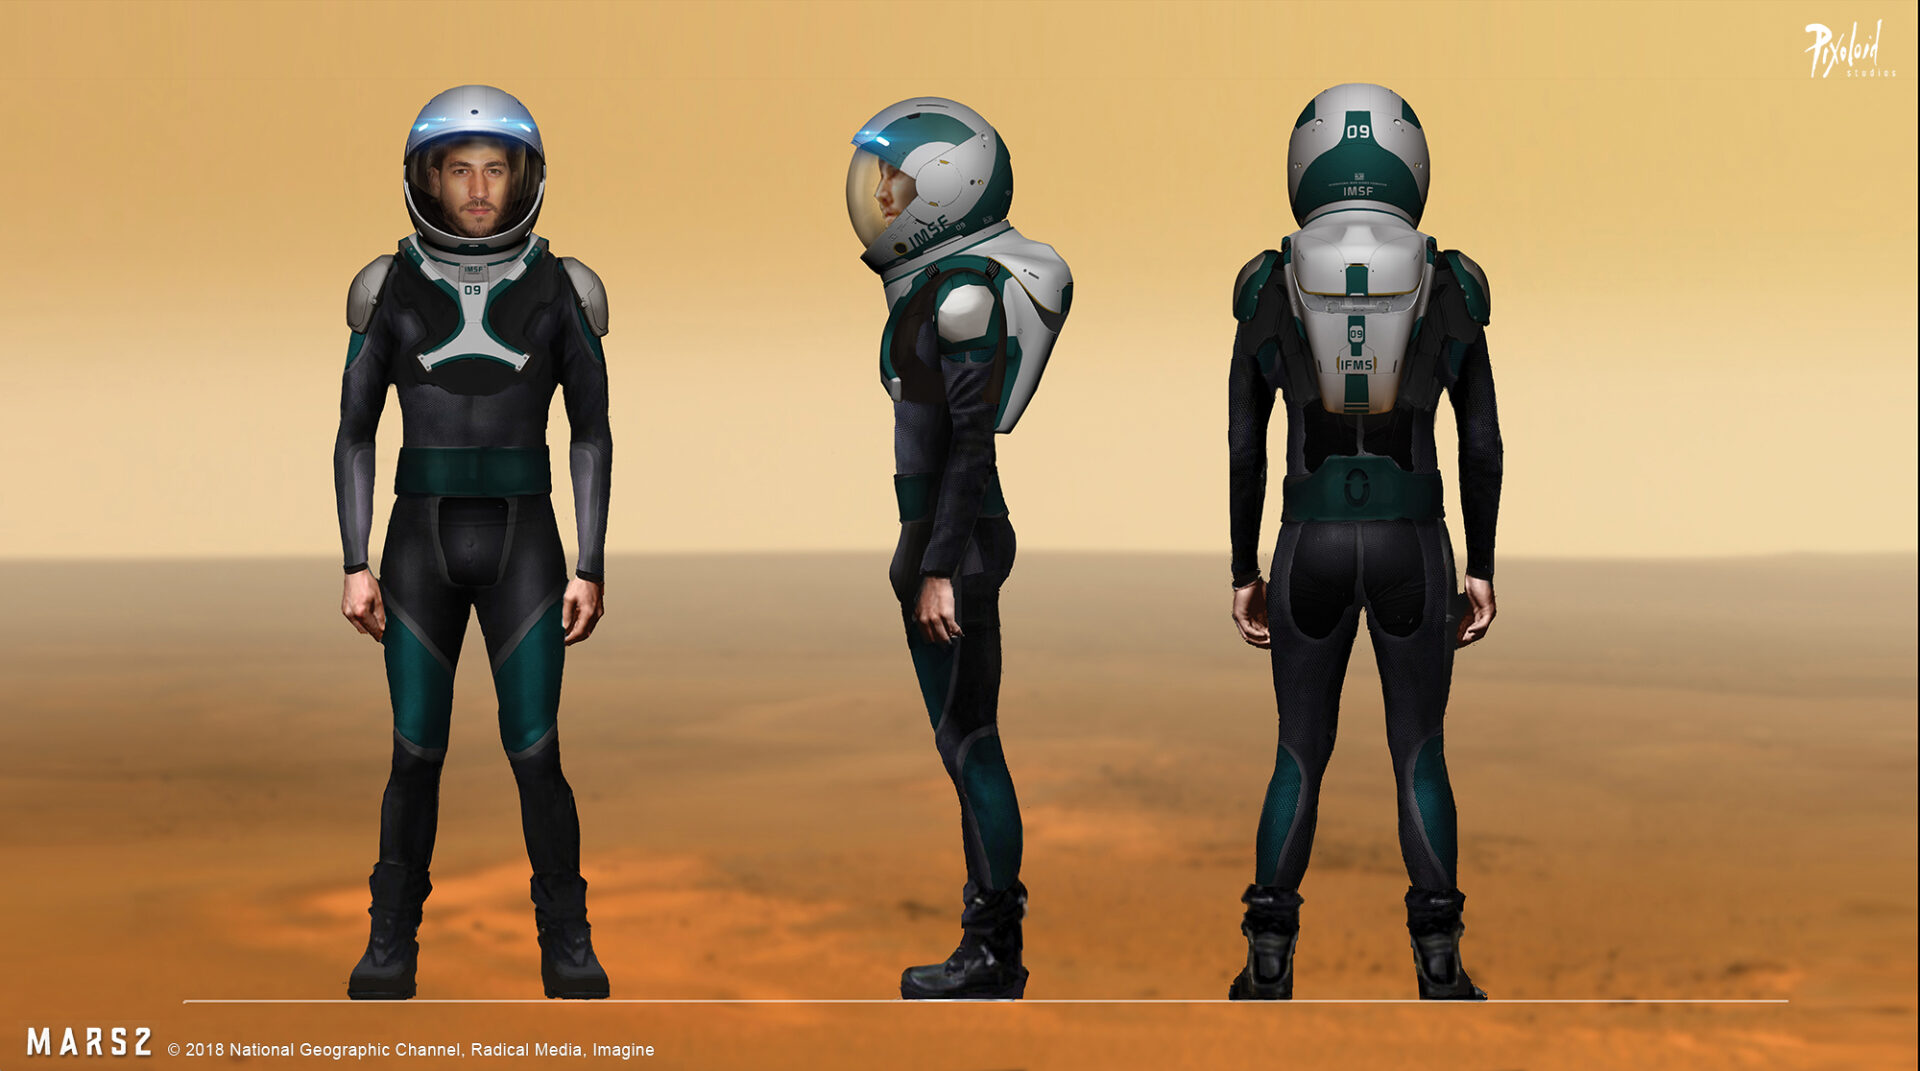 Space suit / costume design for MARS series / National Geographic